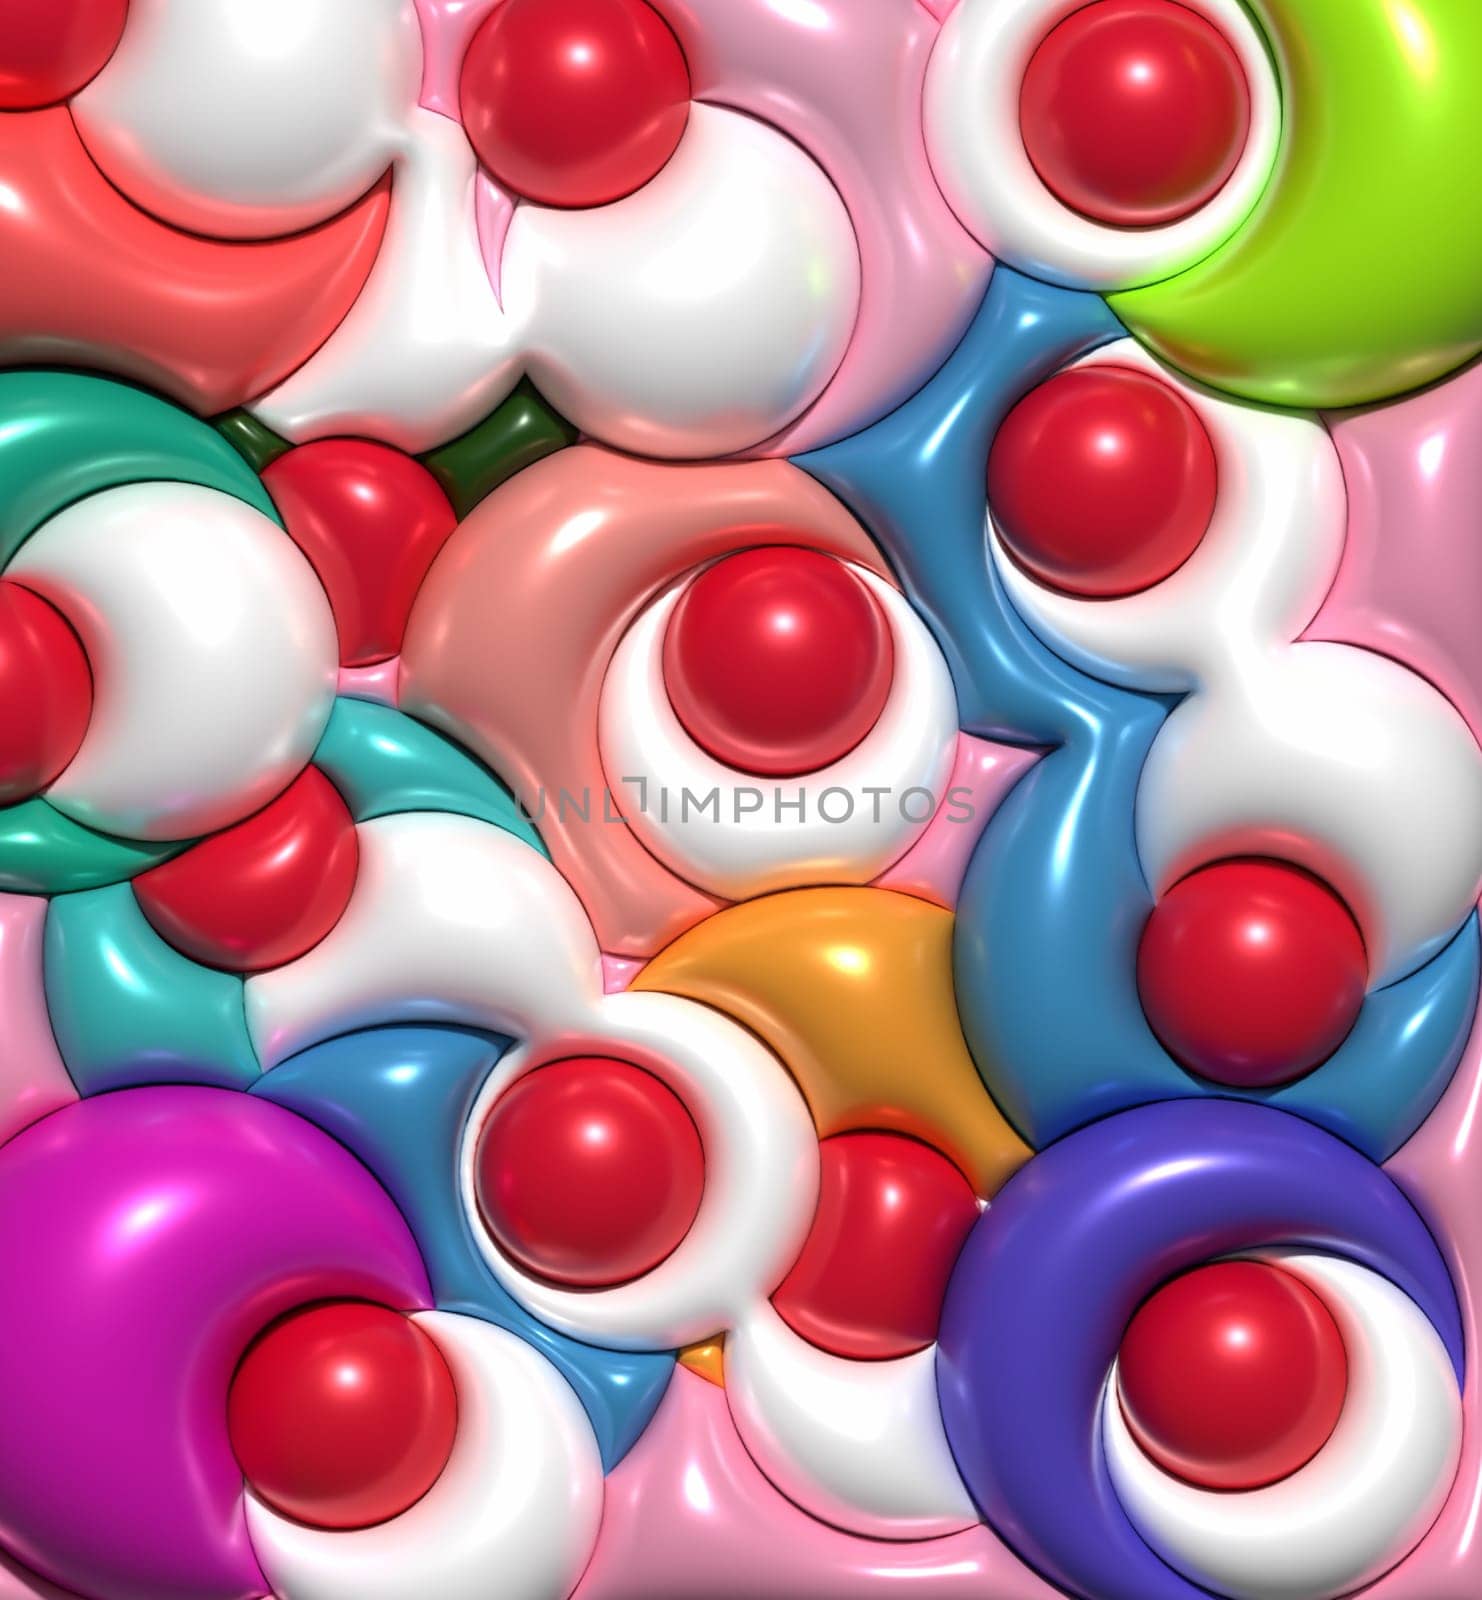 Inflated colorful circles, 3D rendering illustration